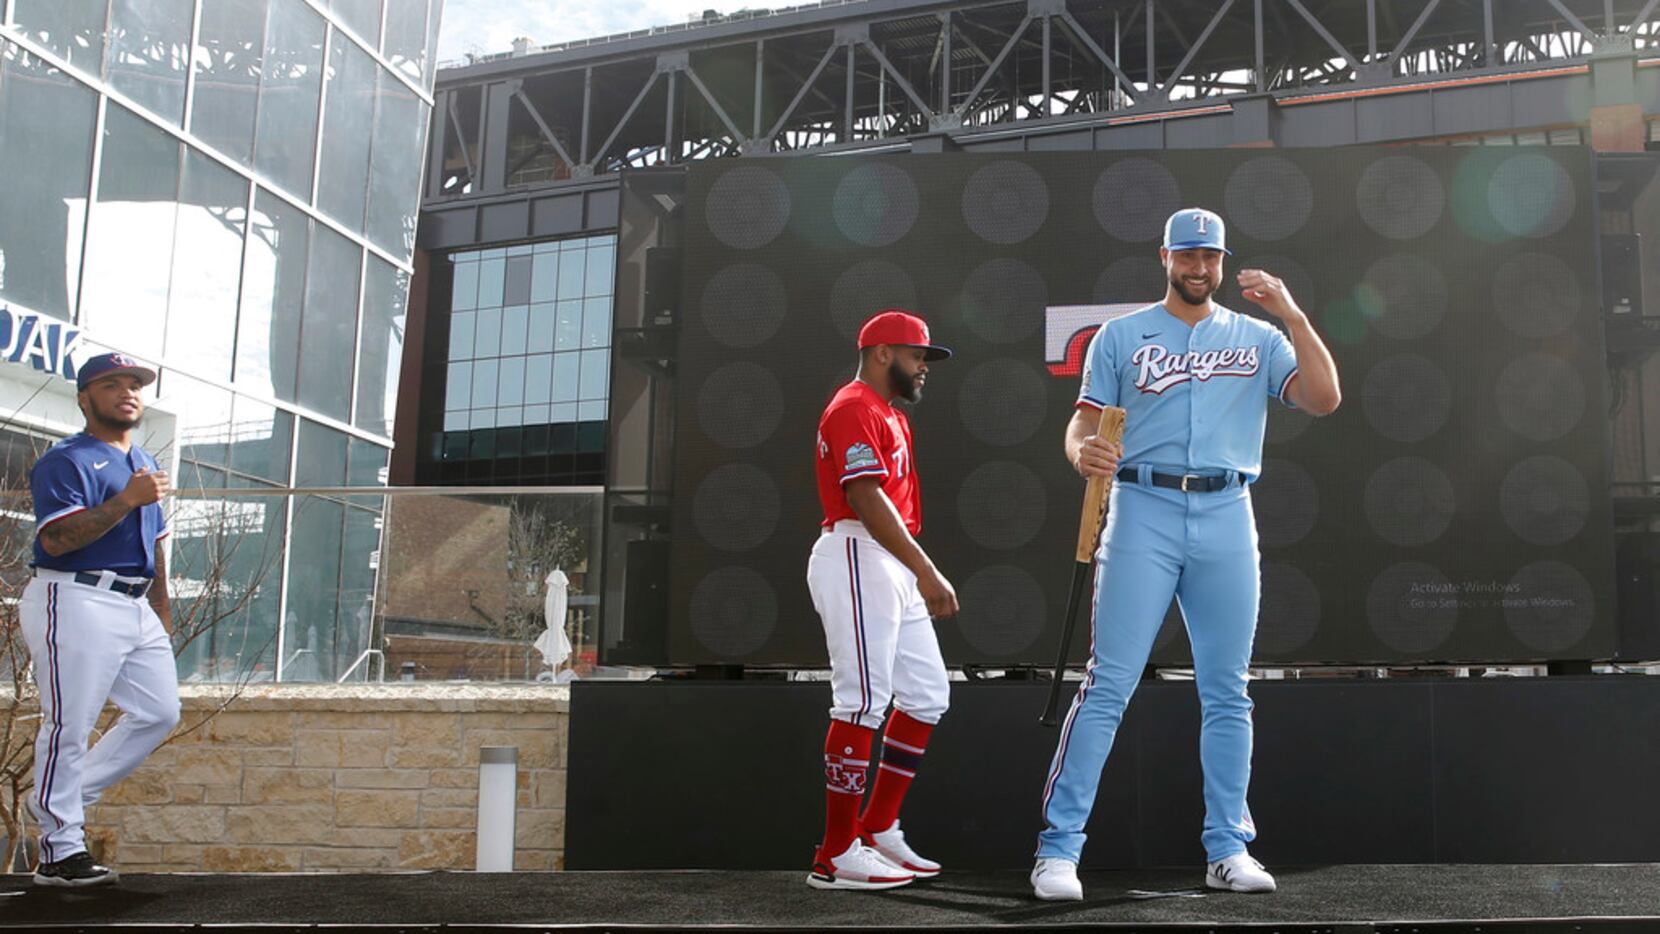 Texas Rangers unveil new uniforms for 2020 season, including baby